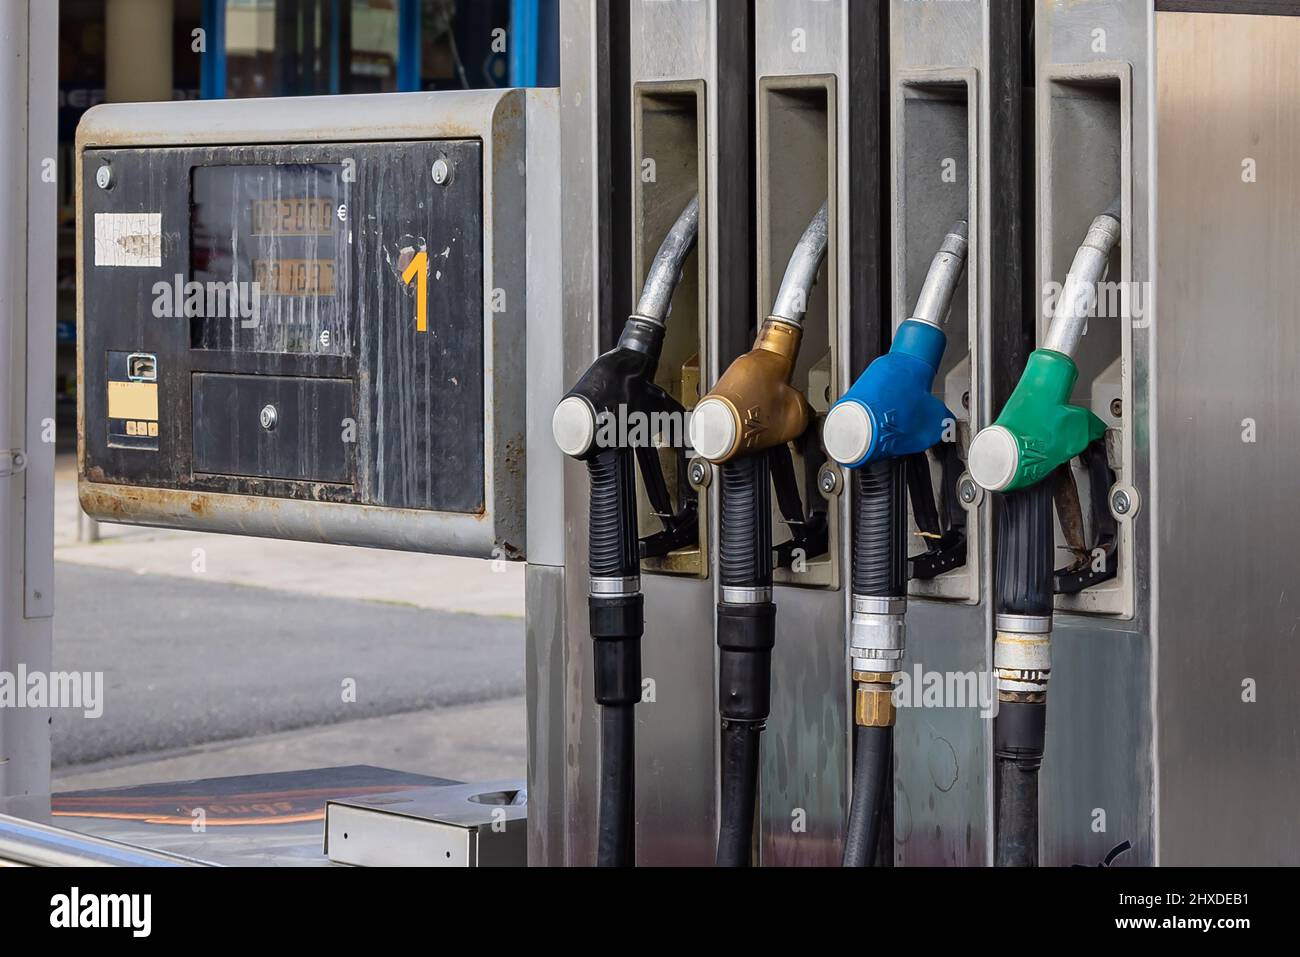 Pump nozzles of a petrol pump in service station Stock Photo